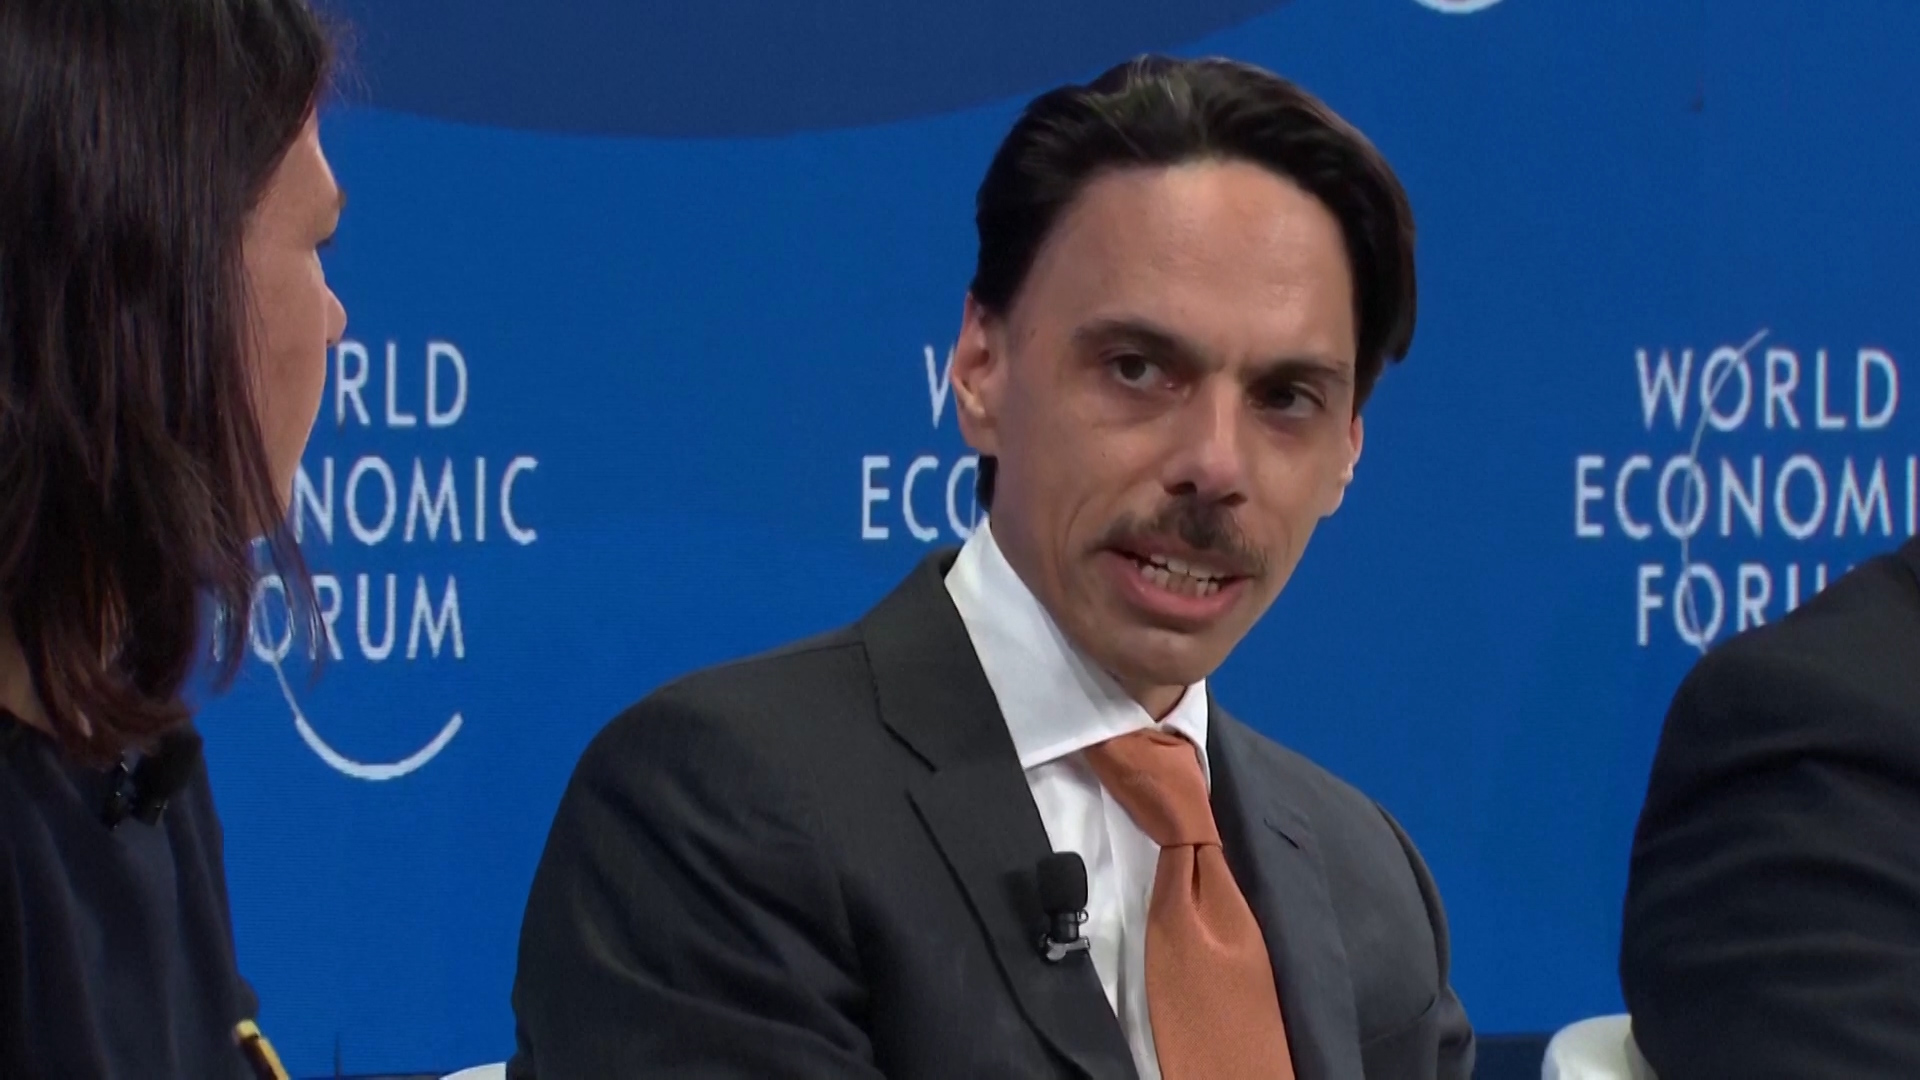 Prince Faisal bin Farhan took part in a panel at the World Economic Forum in Davos./Reuters